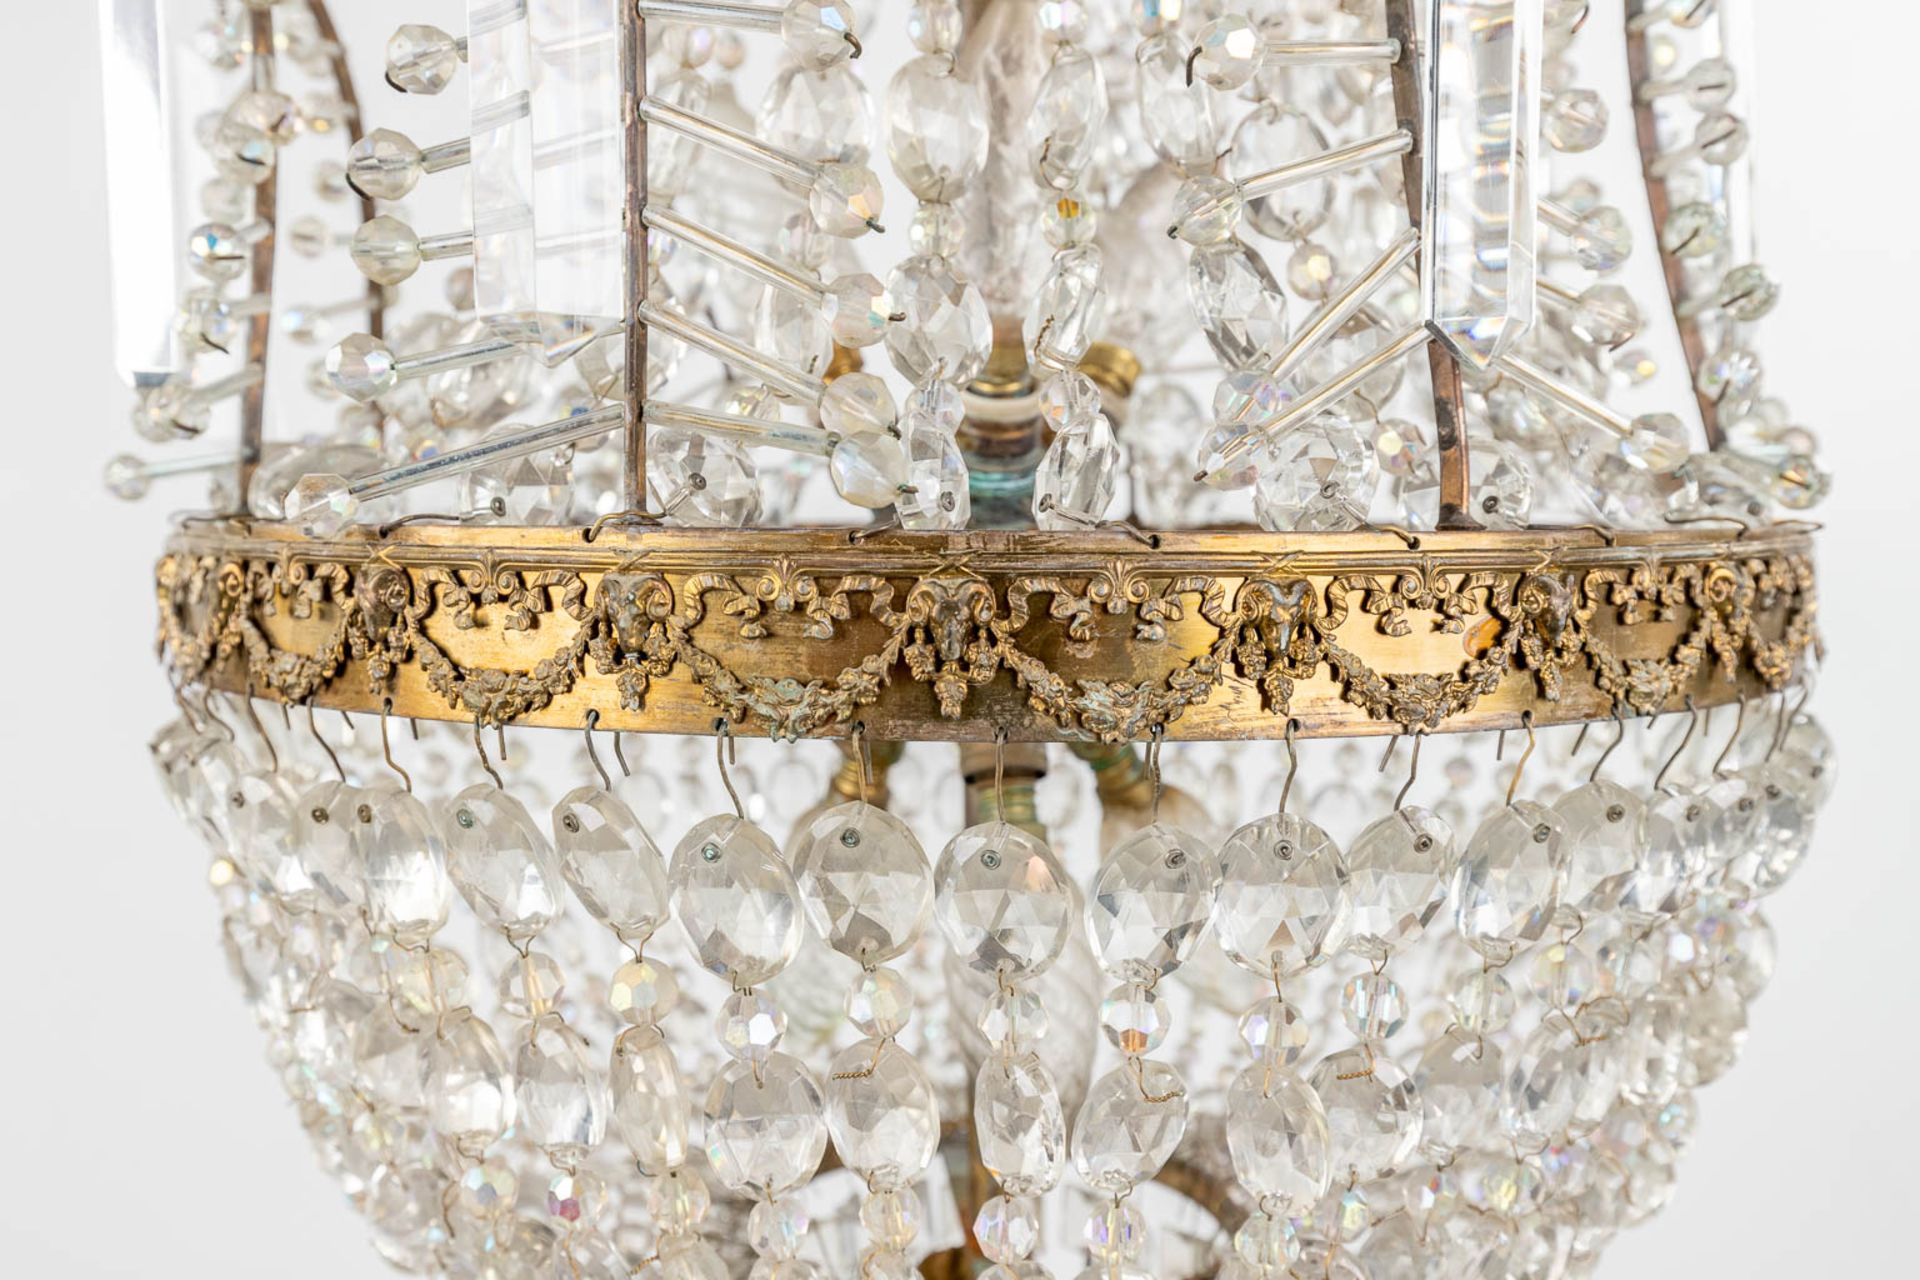 A chandelier 'Sac A Perles' decorated with tiny ram's heads. 20th century. (H: 83 x D: 42 cm) - Image 4 of 10